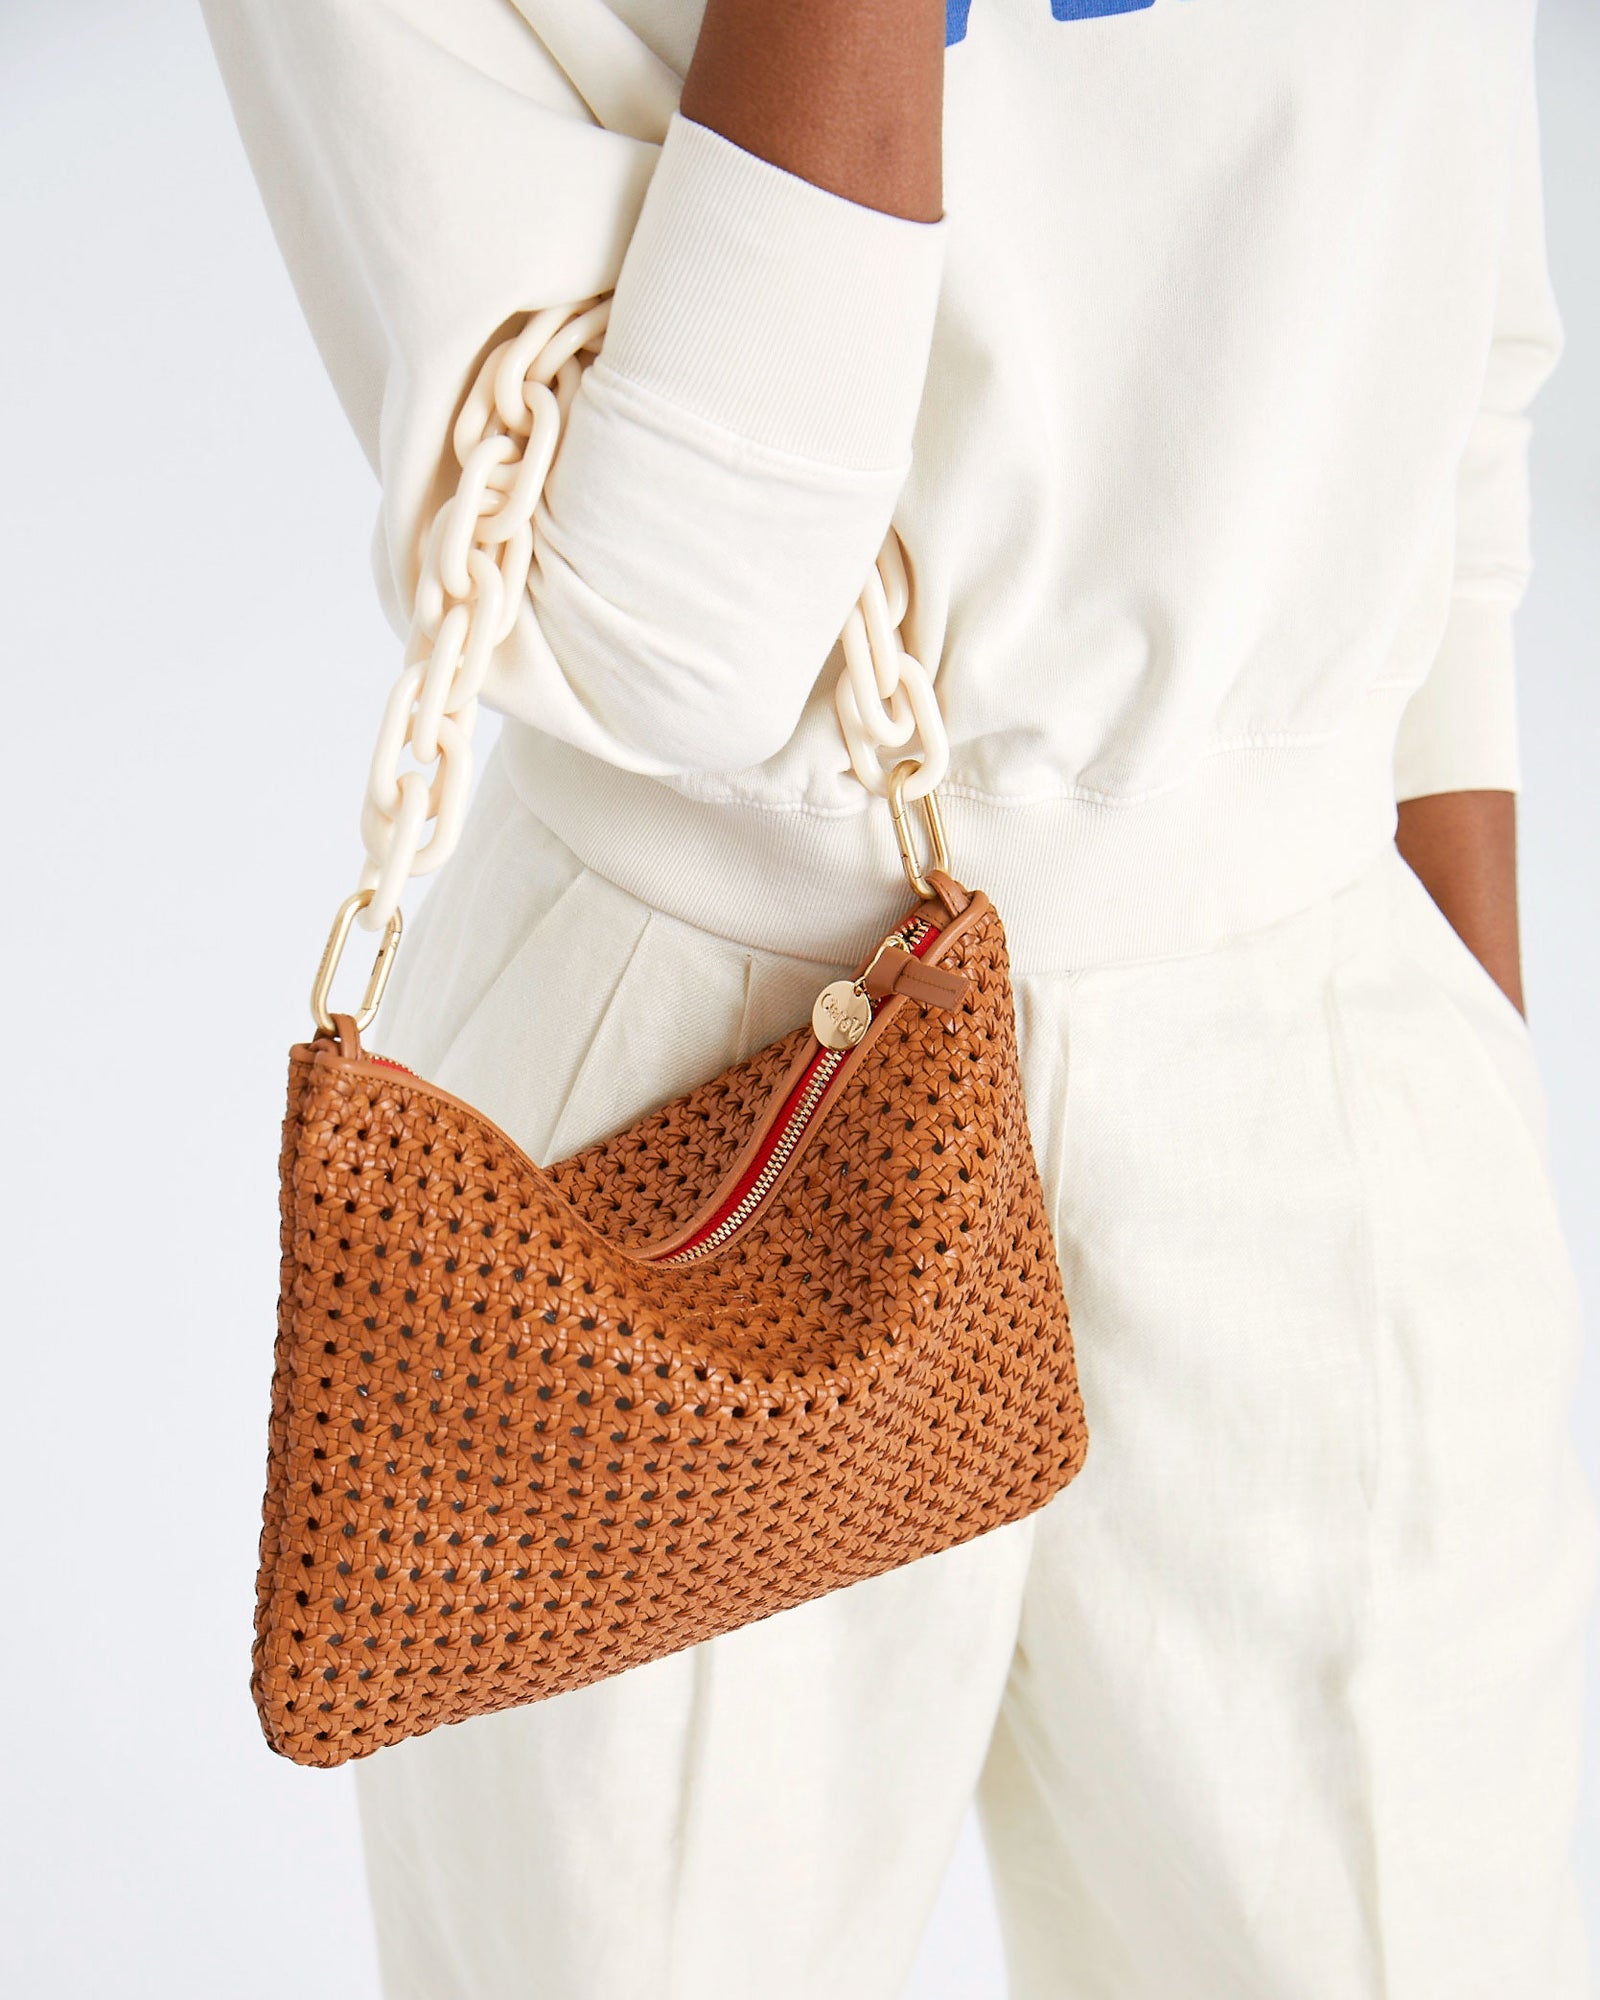 Rattan Foldover Clutch w/ Tabs in Cream Clare V. is the place to